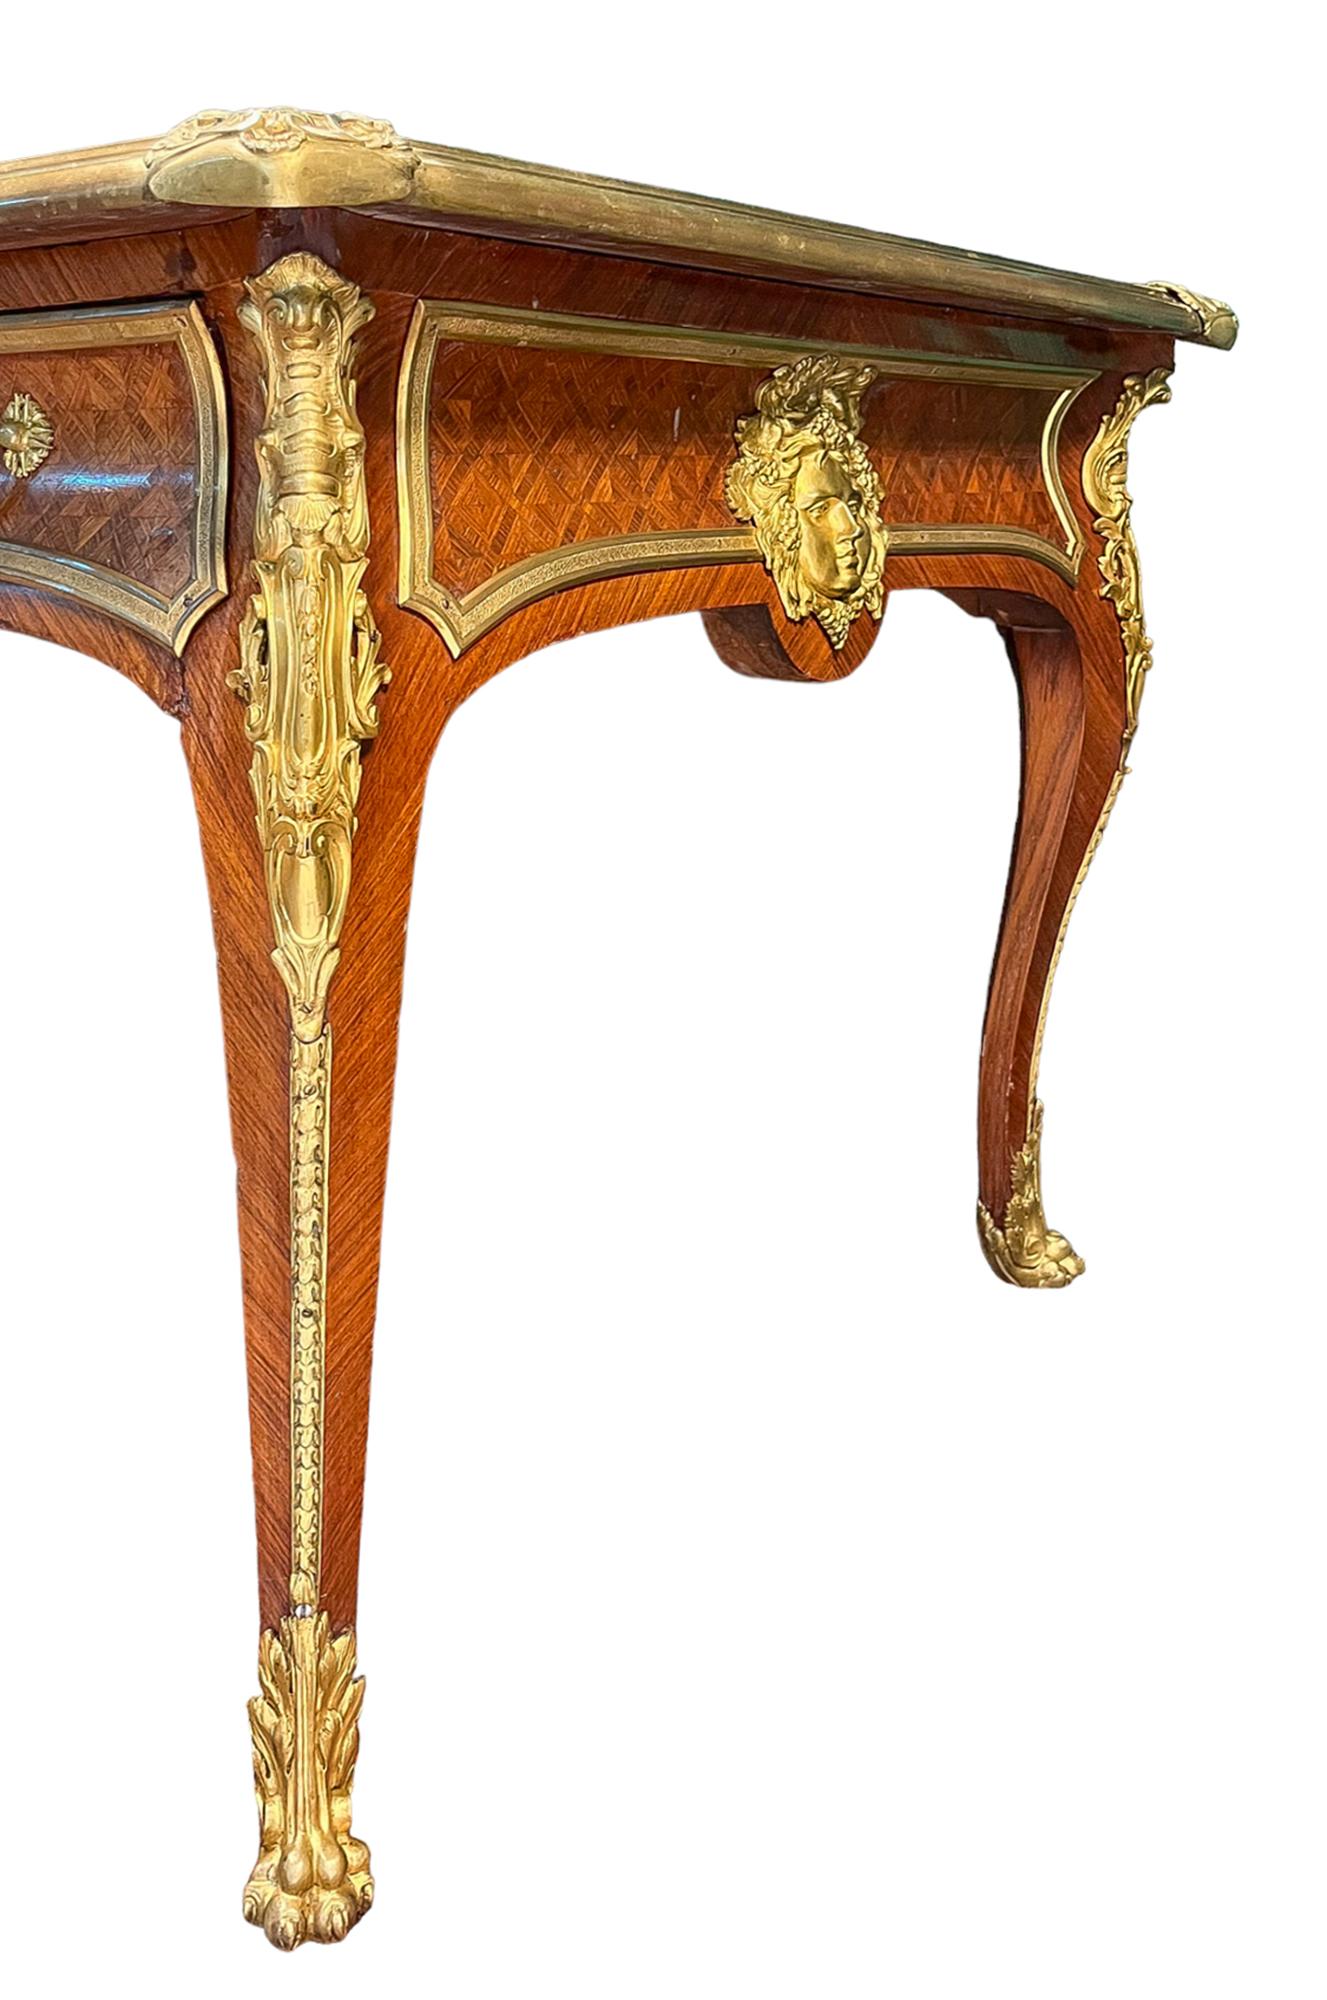 French Ormolu Mounted Bacchus Desk with Bureau Parquetry All in Tulipwood For Sale 4